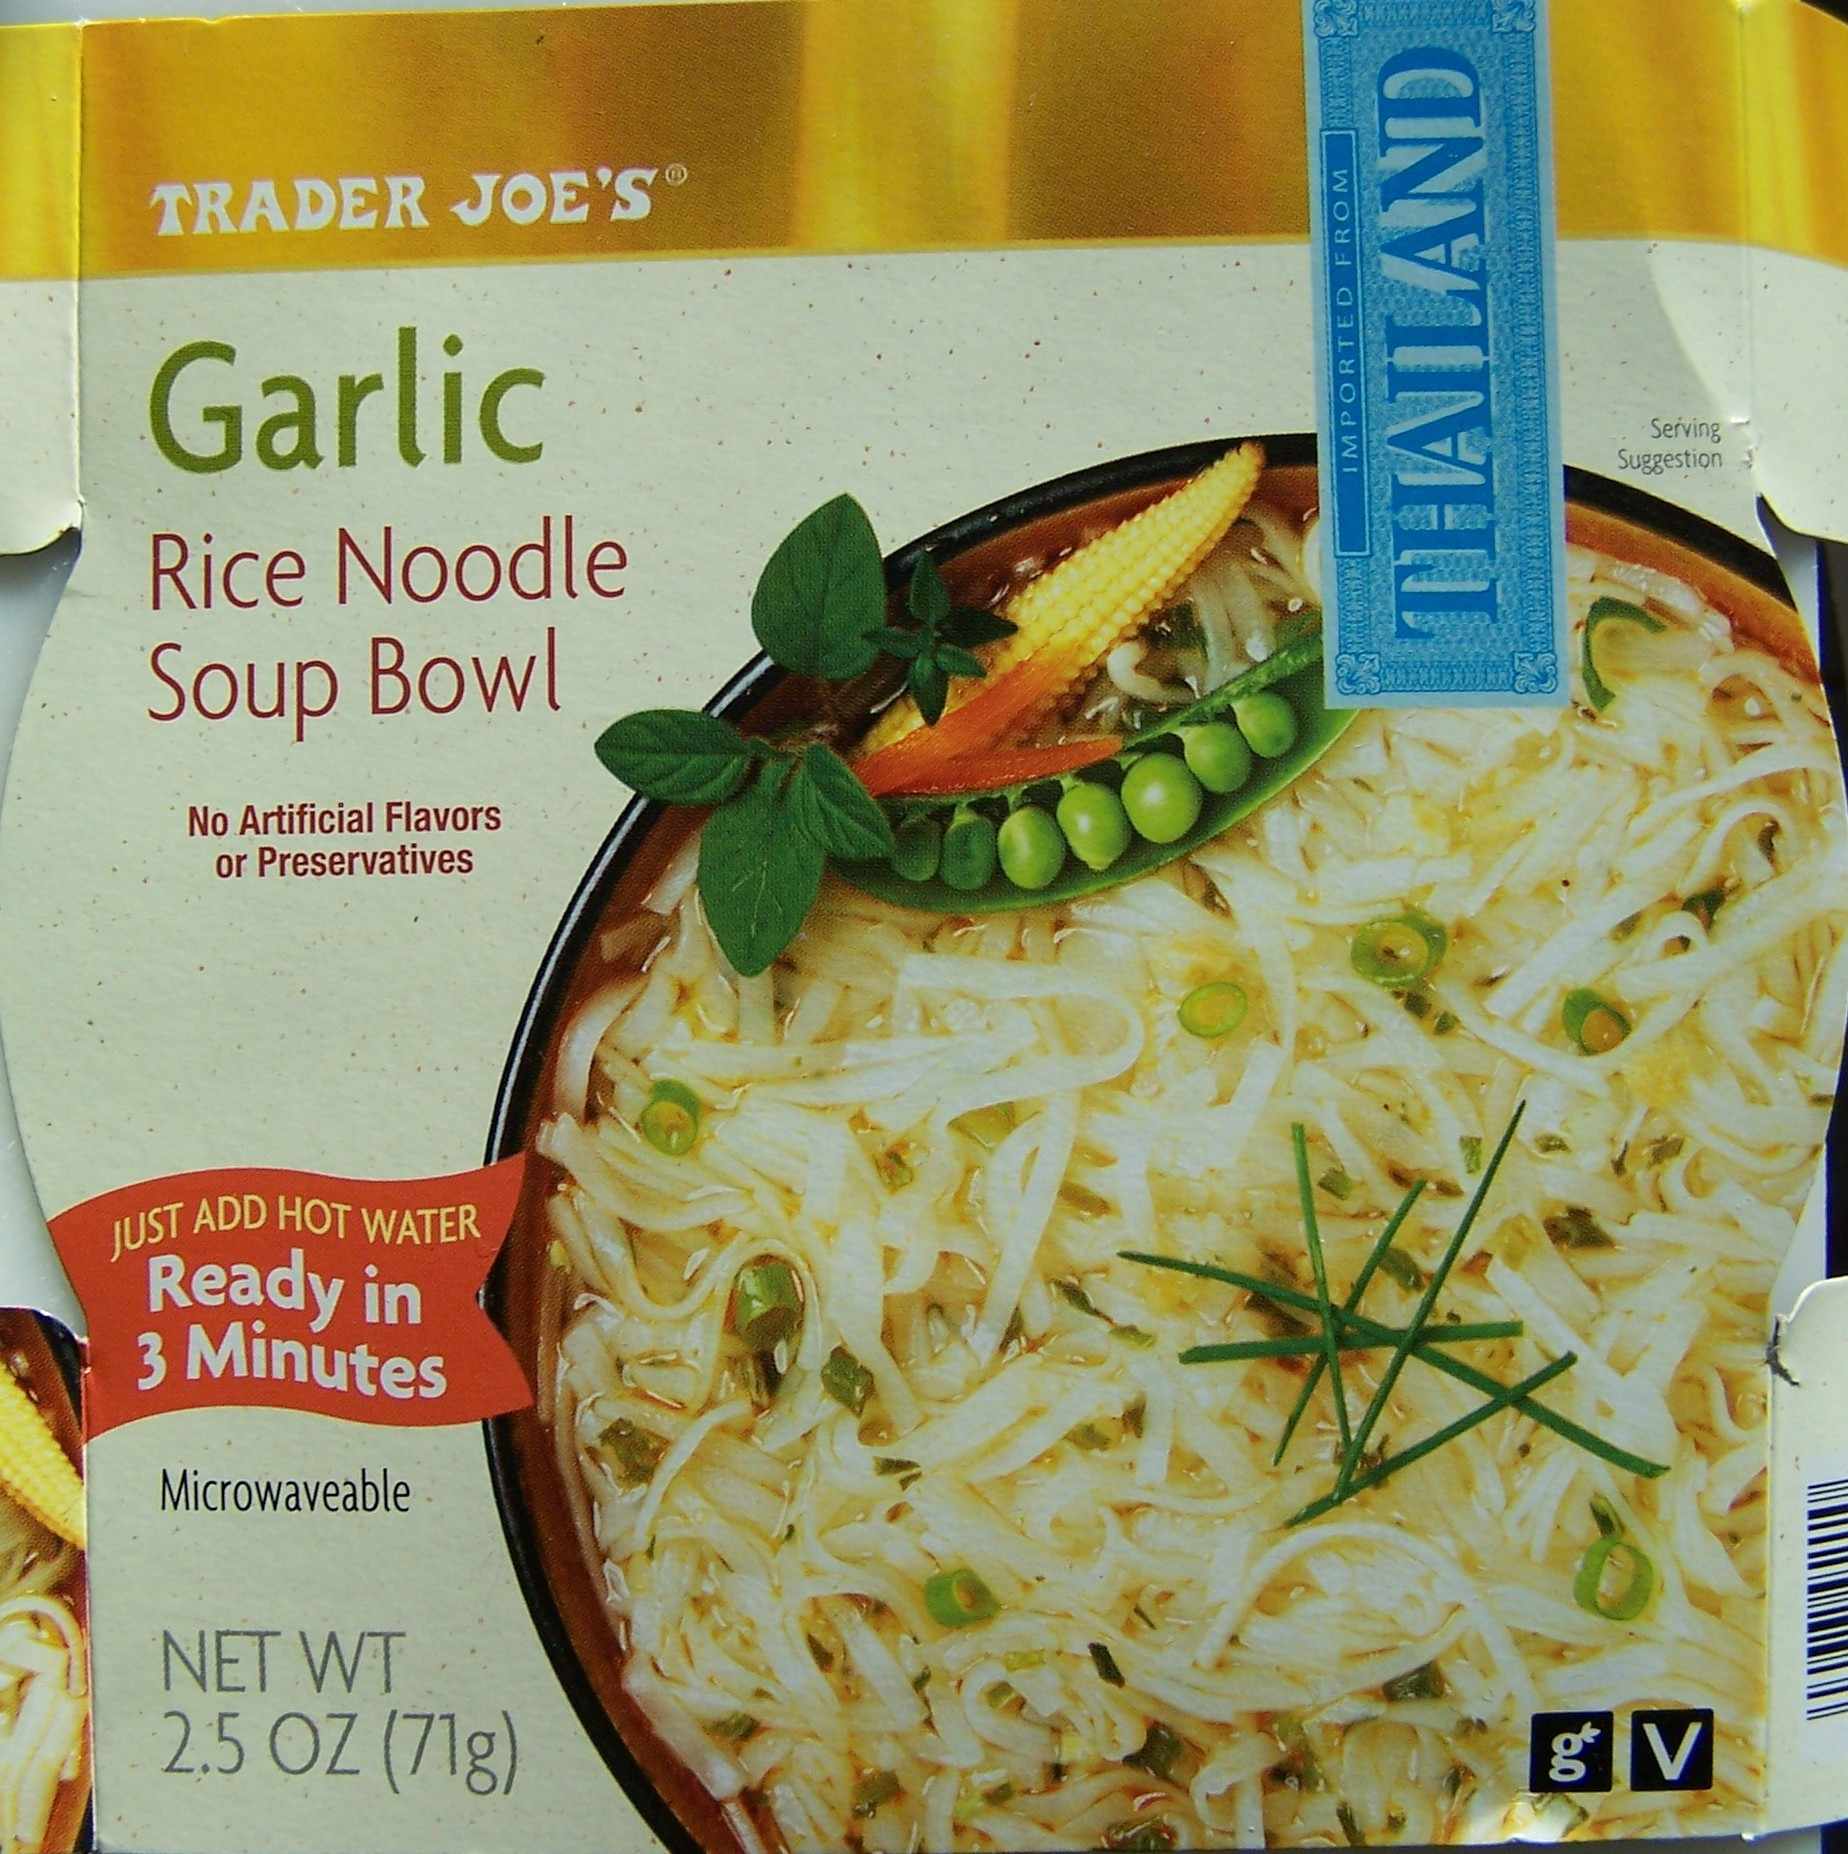 23 Ideas for Trader Joe's Rice Noodles Home, Family, Style and Art Ideas